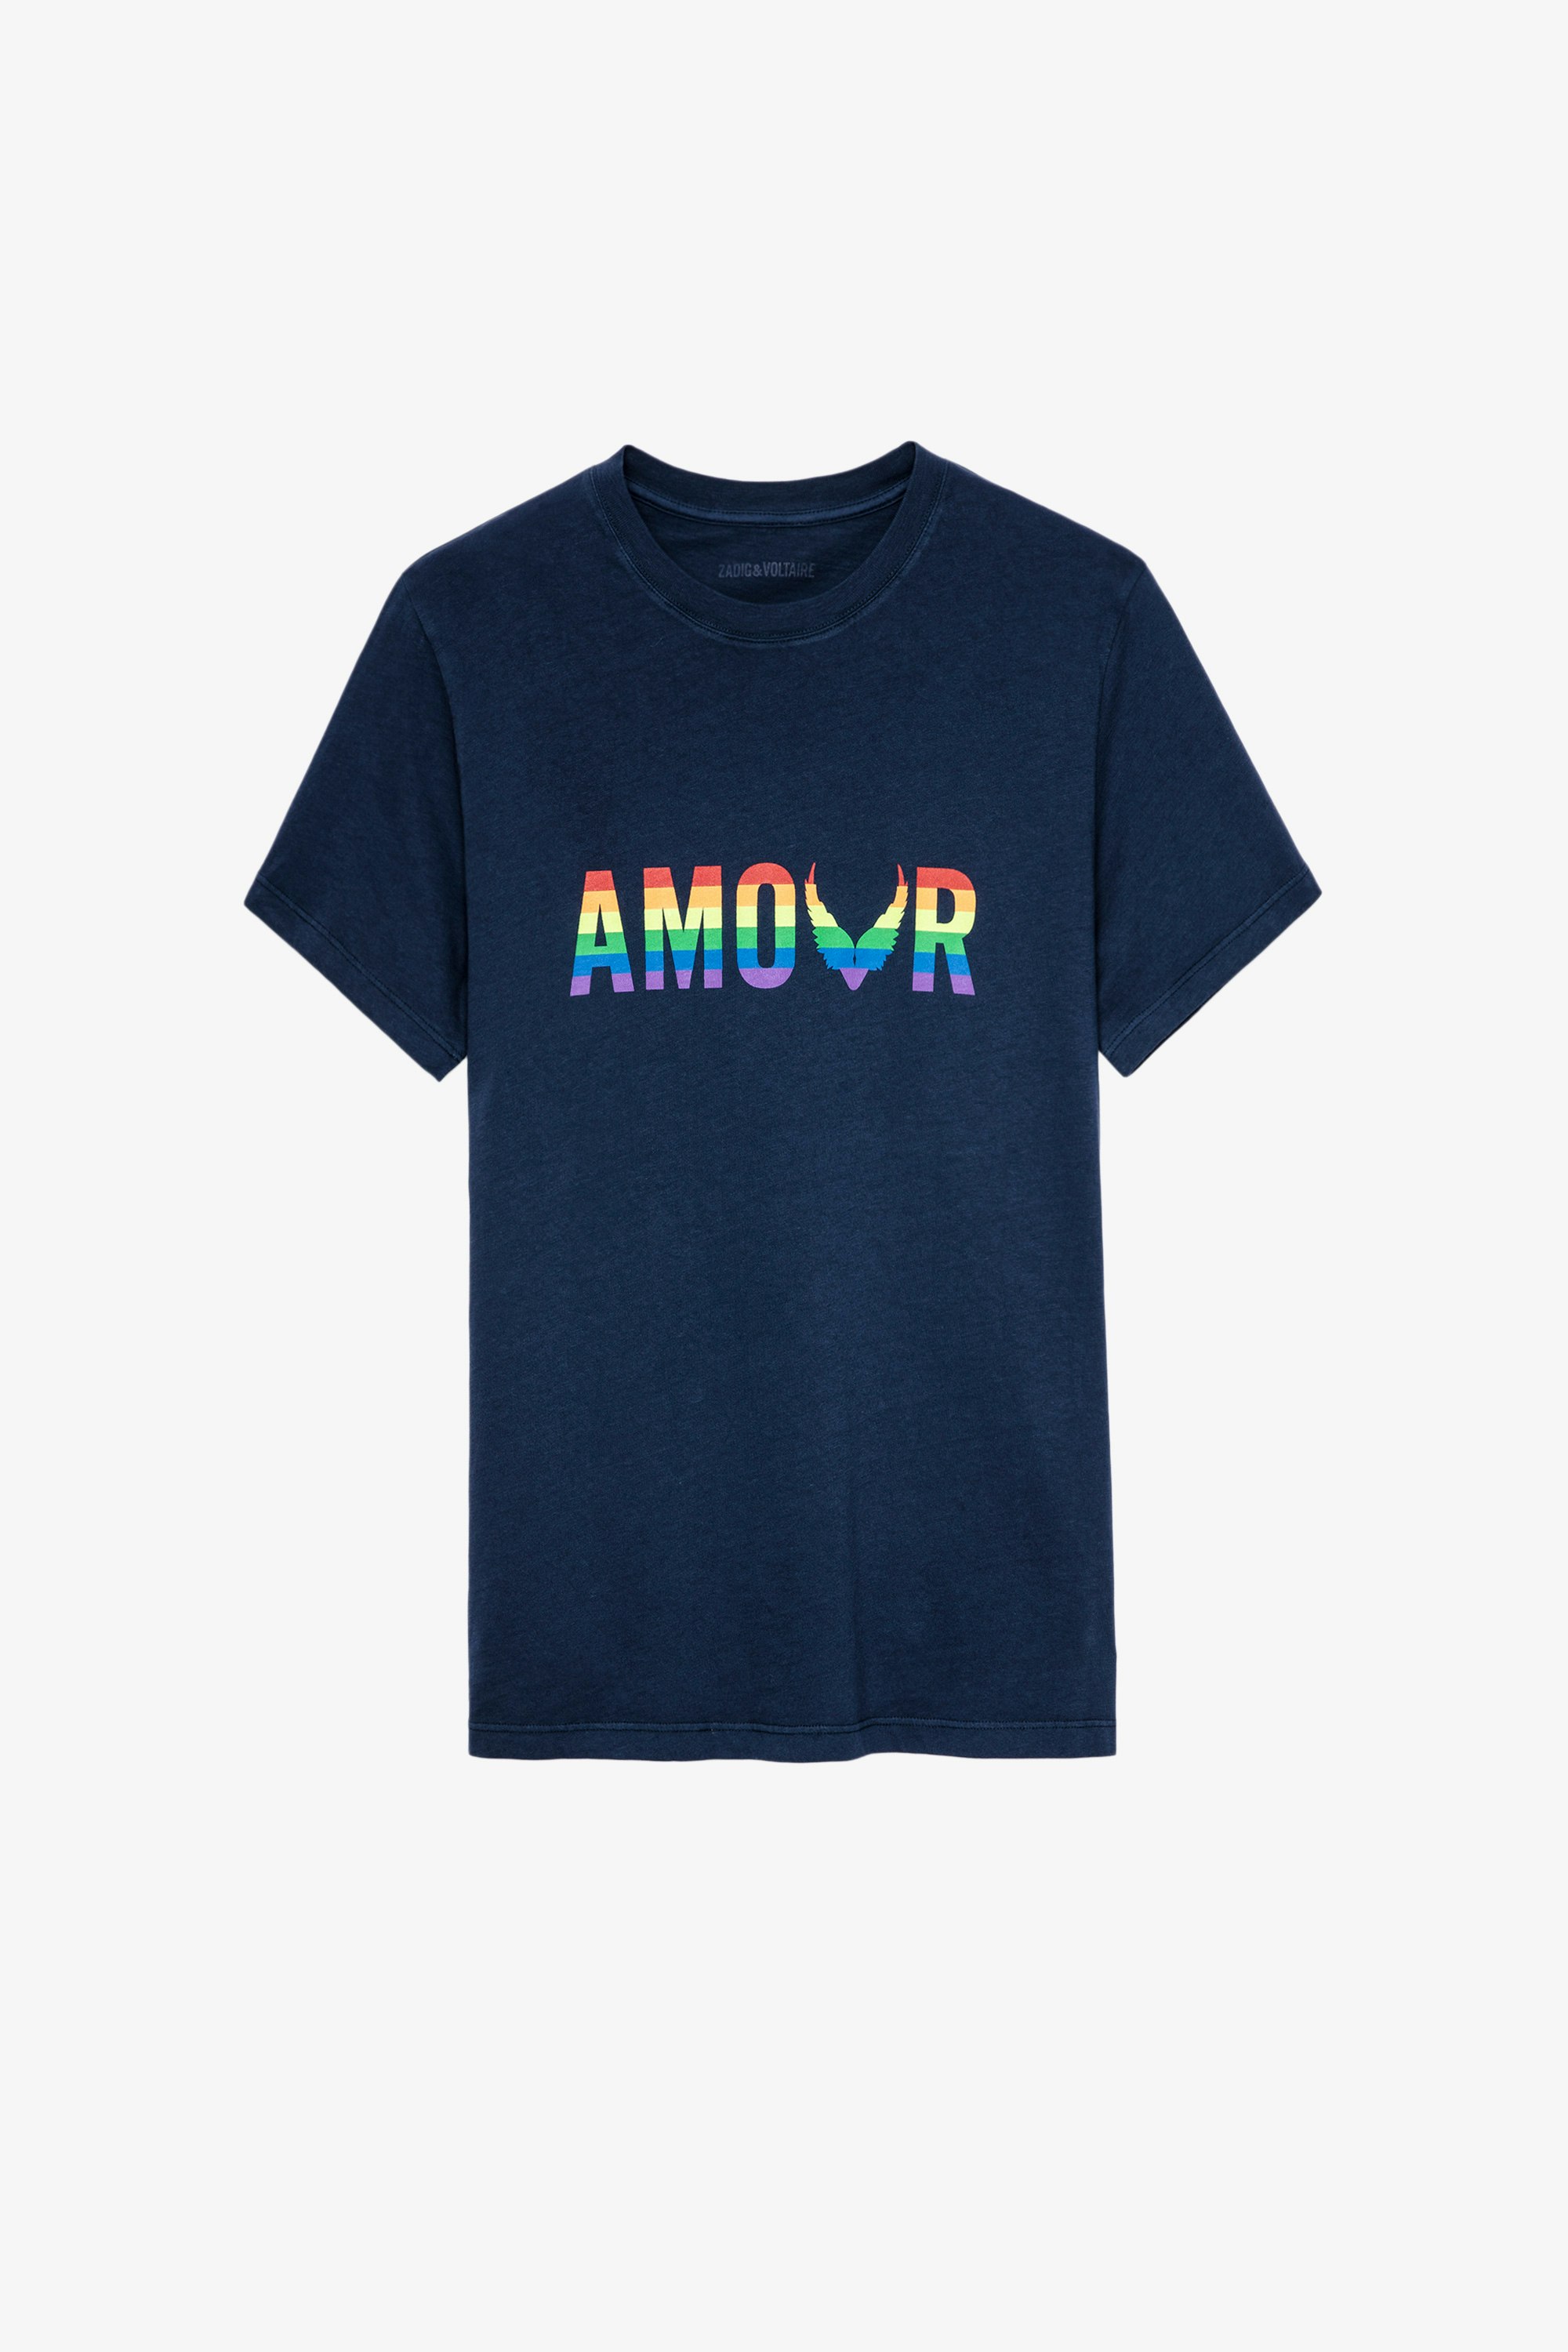 Tommy Amour Wings Ｔシャツ Women’s navy blue cotton T-shirt with multicoloured Amour print